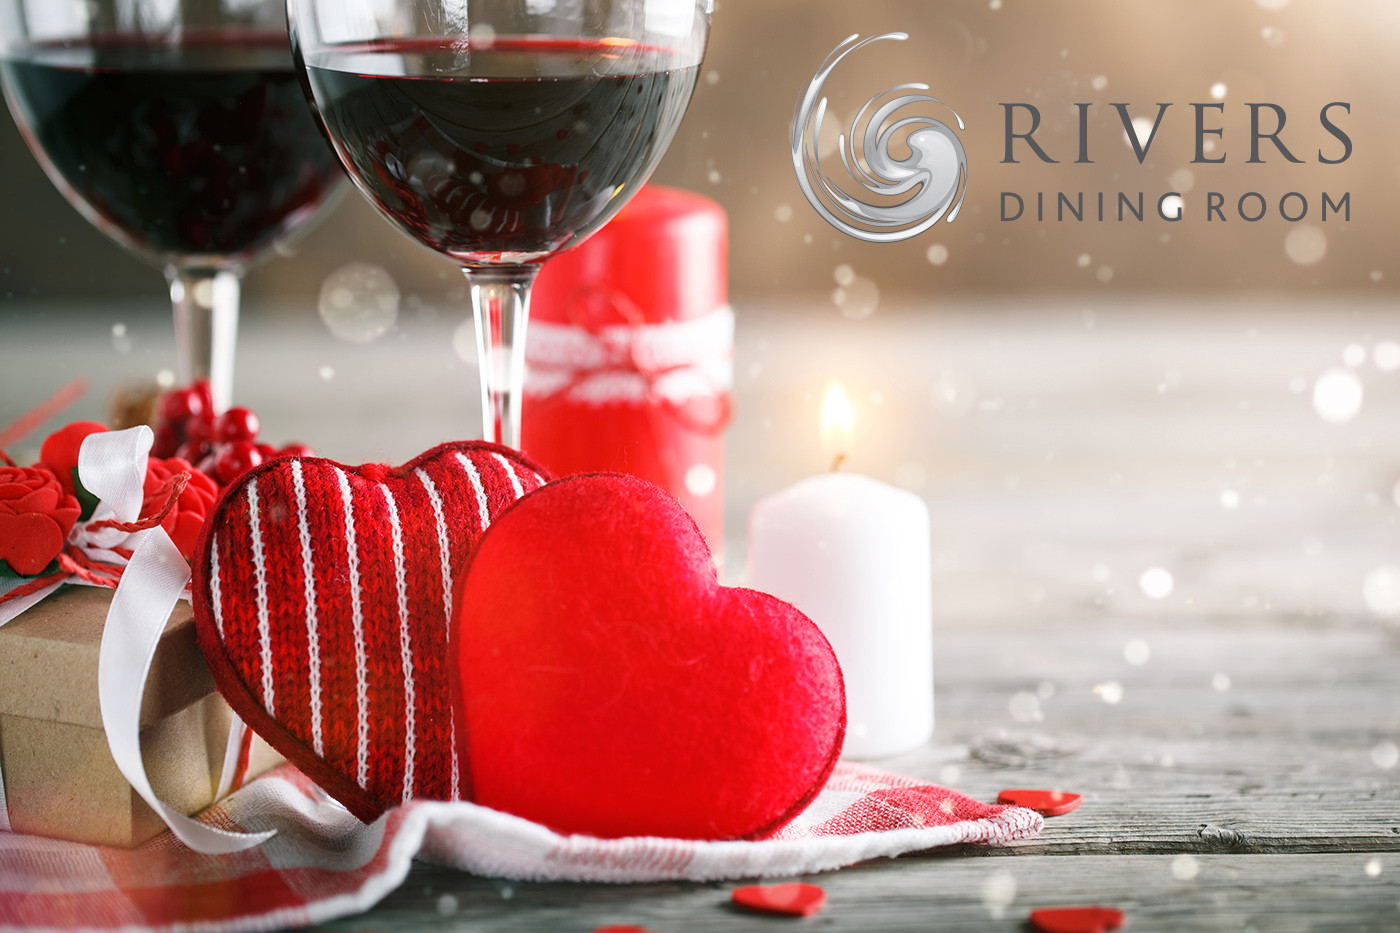 Valentine Dinner Restaurants
 Spice up your romance with a Valentine’s gourmet meal at